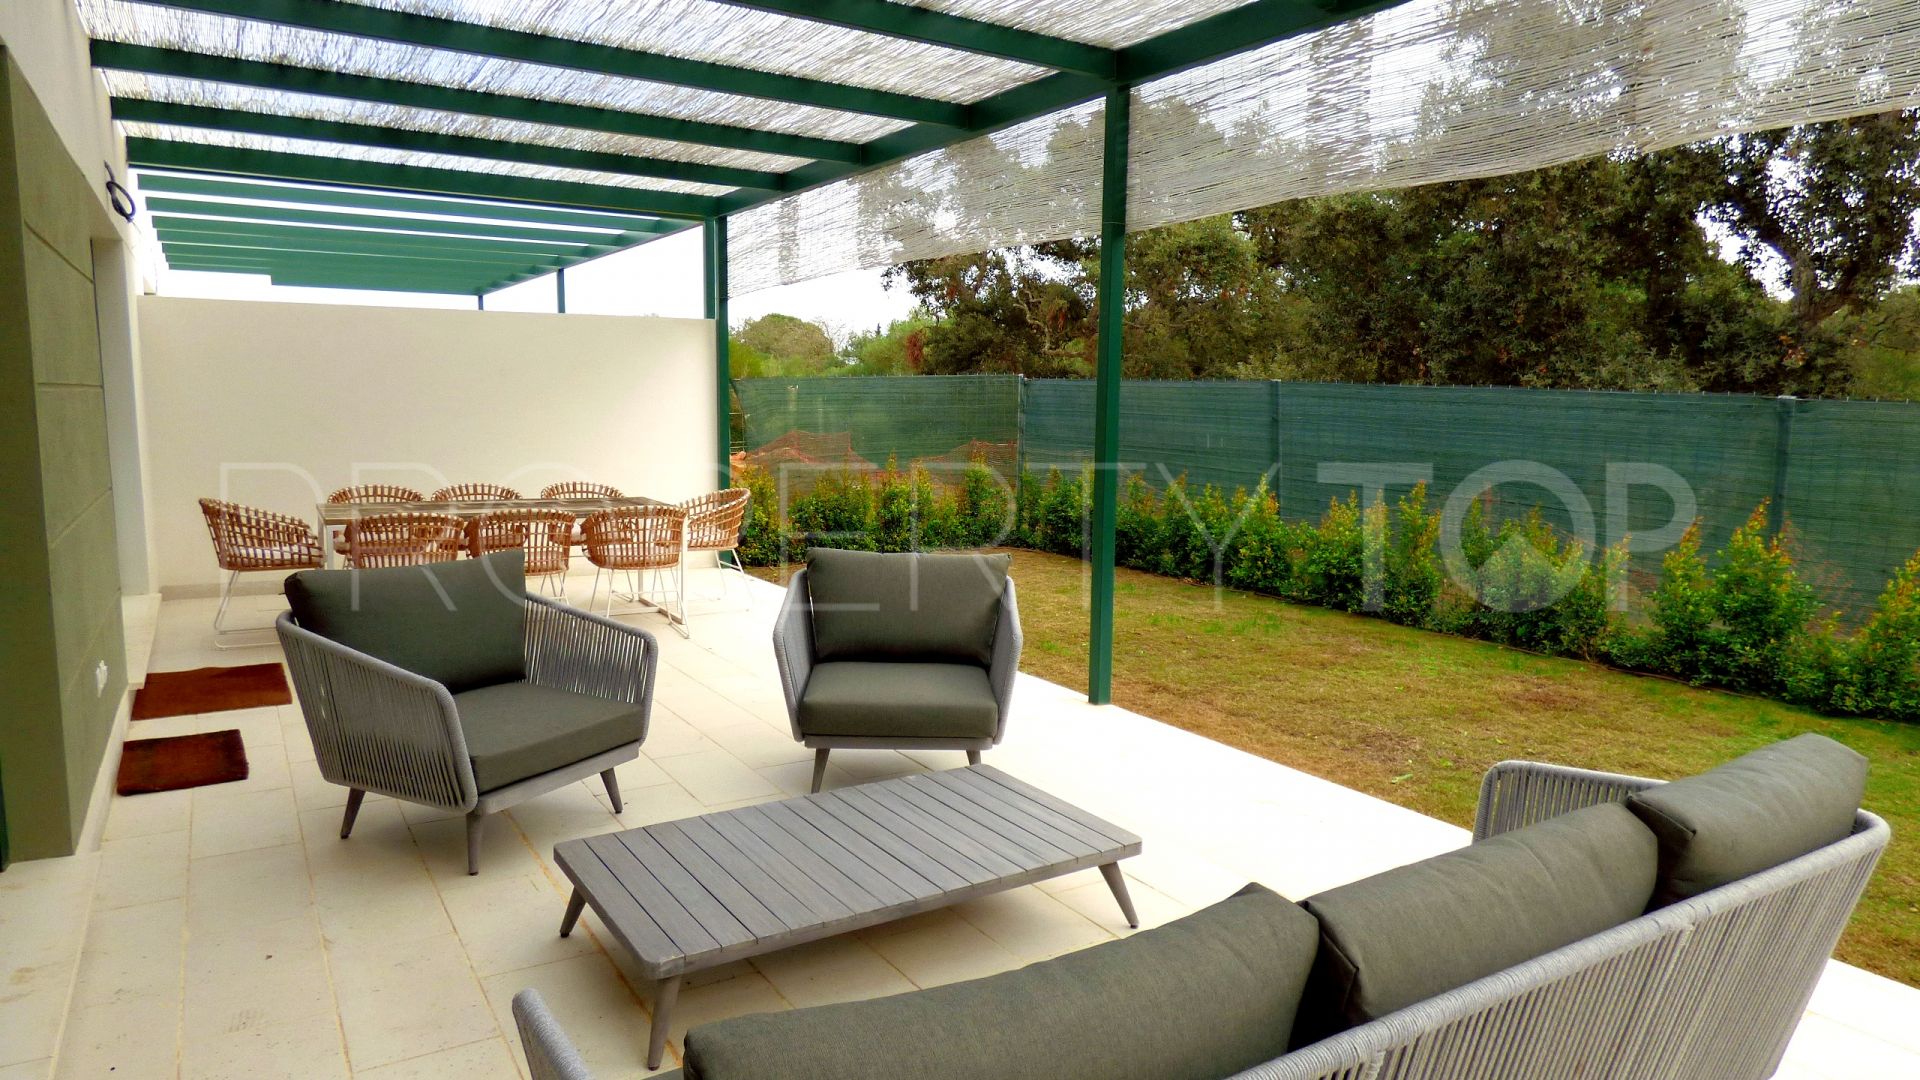 3 bedrooms ground floor apartment for sale in Sotogrande Alto Central